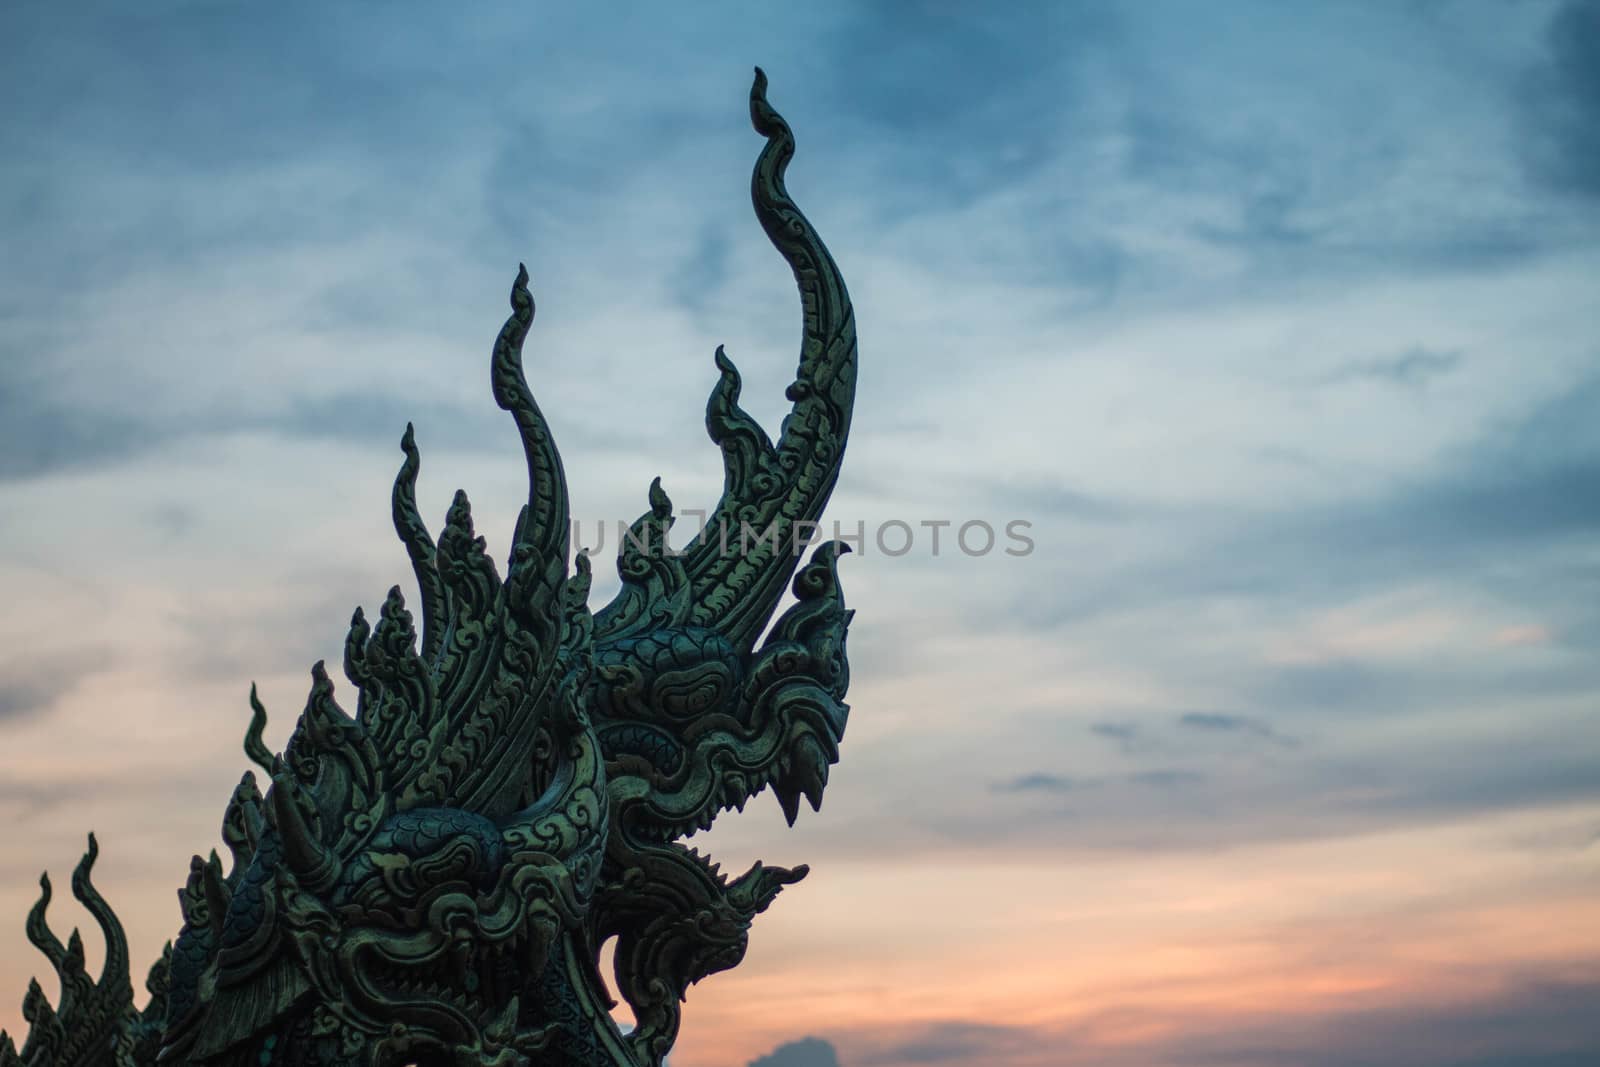 beautiful naga statue or King of nagas Serpent animal in Buddhist legend by N_u_T